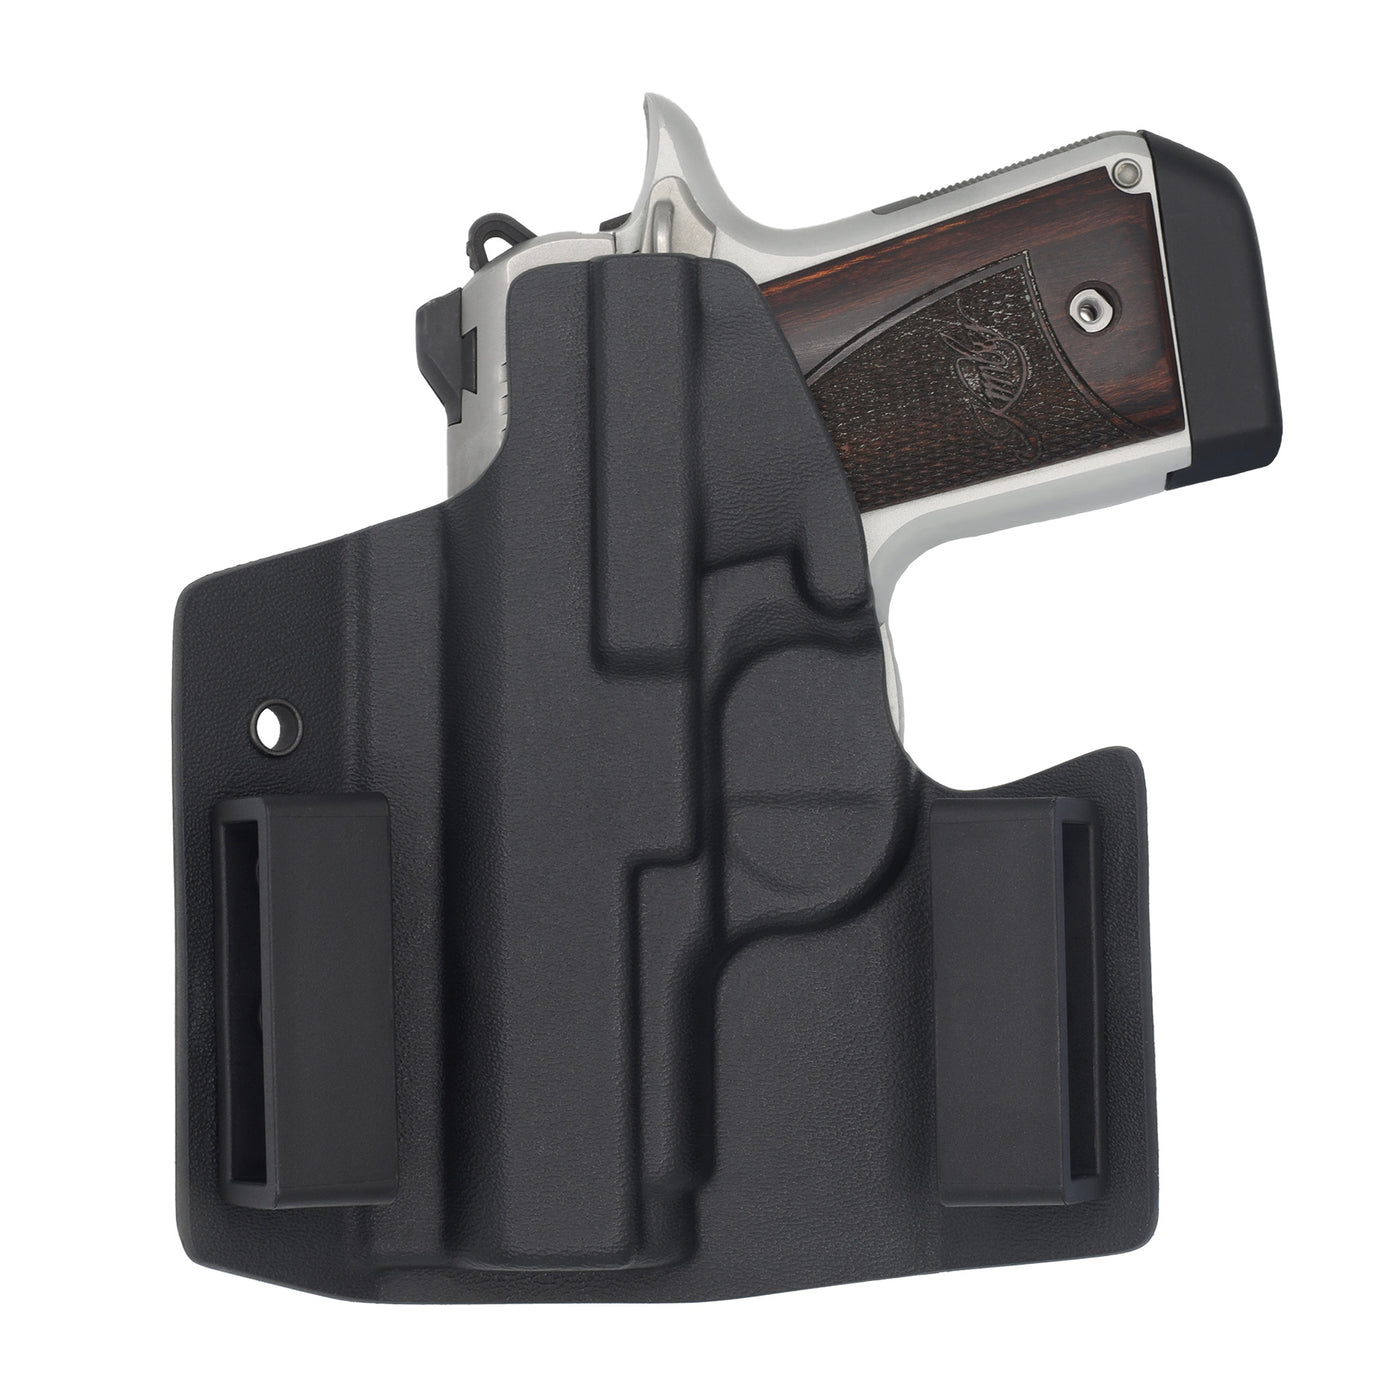 This is the back of a custom C&G Holsters OWB Outside the waistband Holster for the Kimber Micro 9.